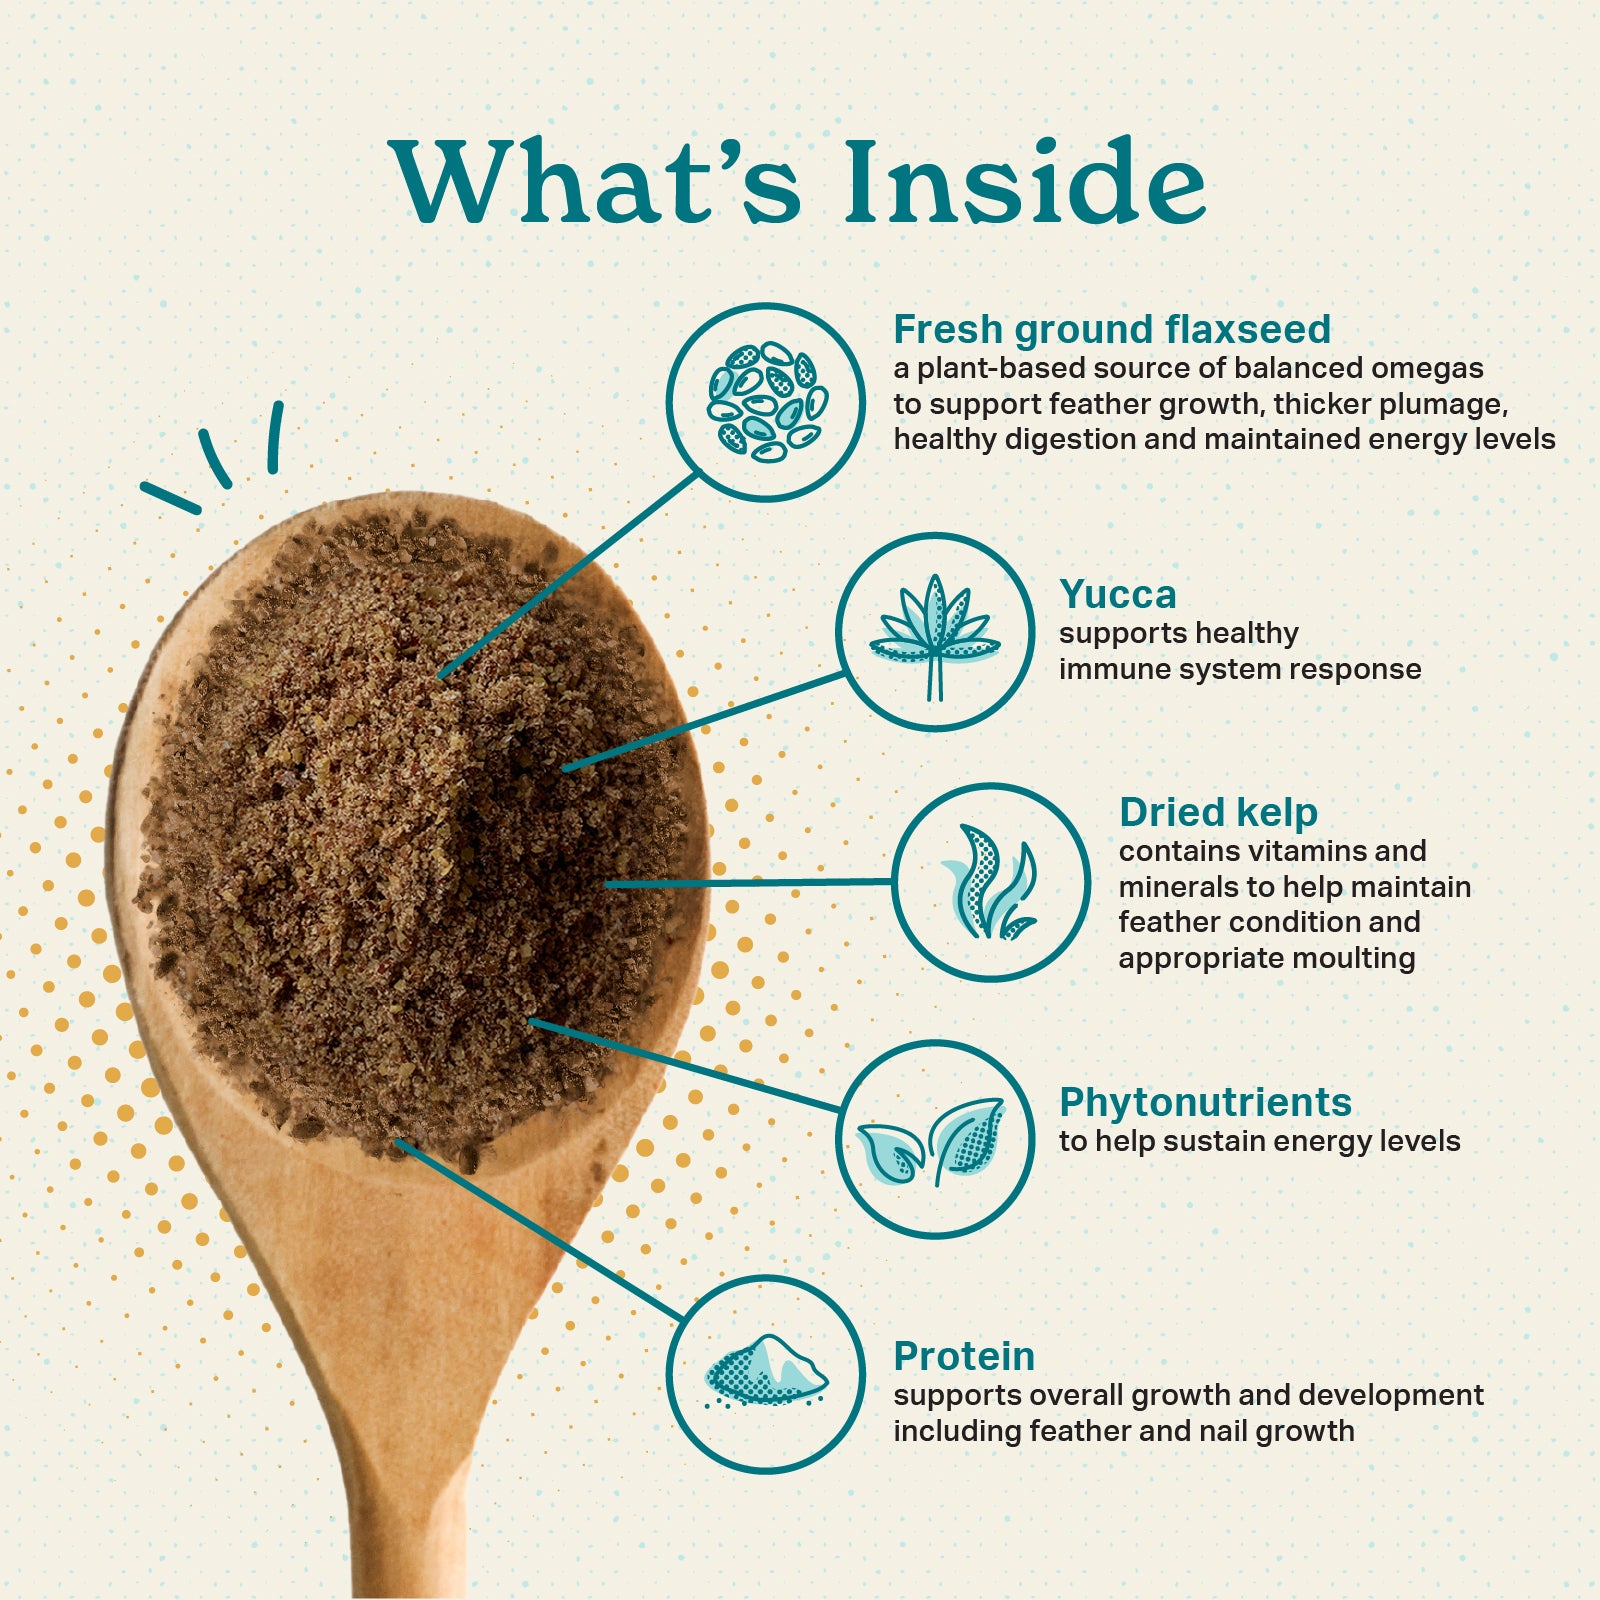 What's Inside, fresh ground flaxseed, yucca, dried kelp, phytonutrients, and protein in our powder supplement.